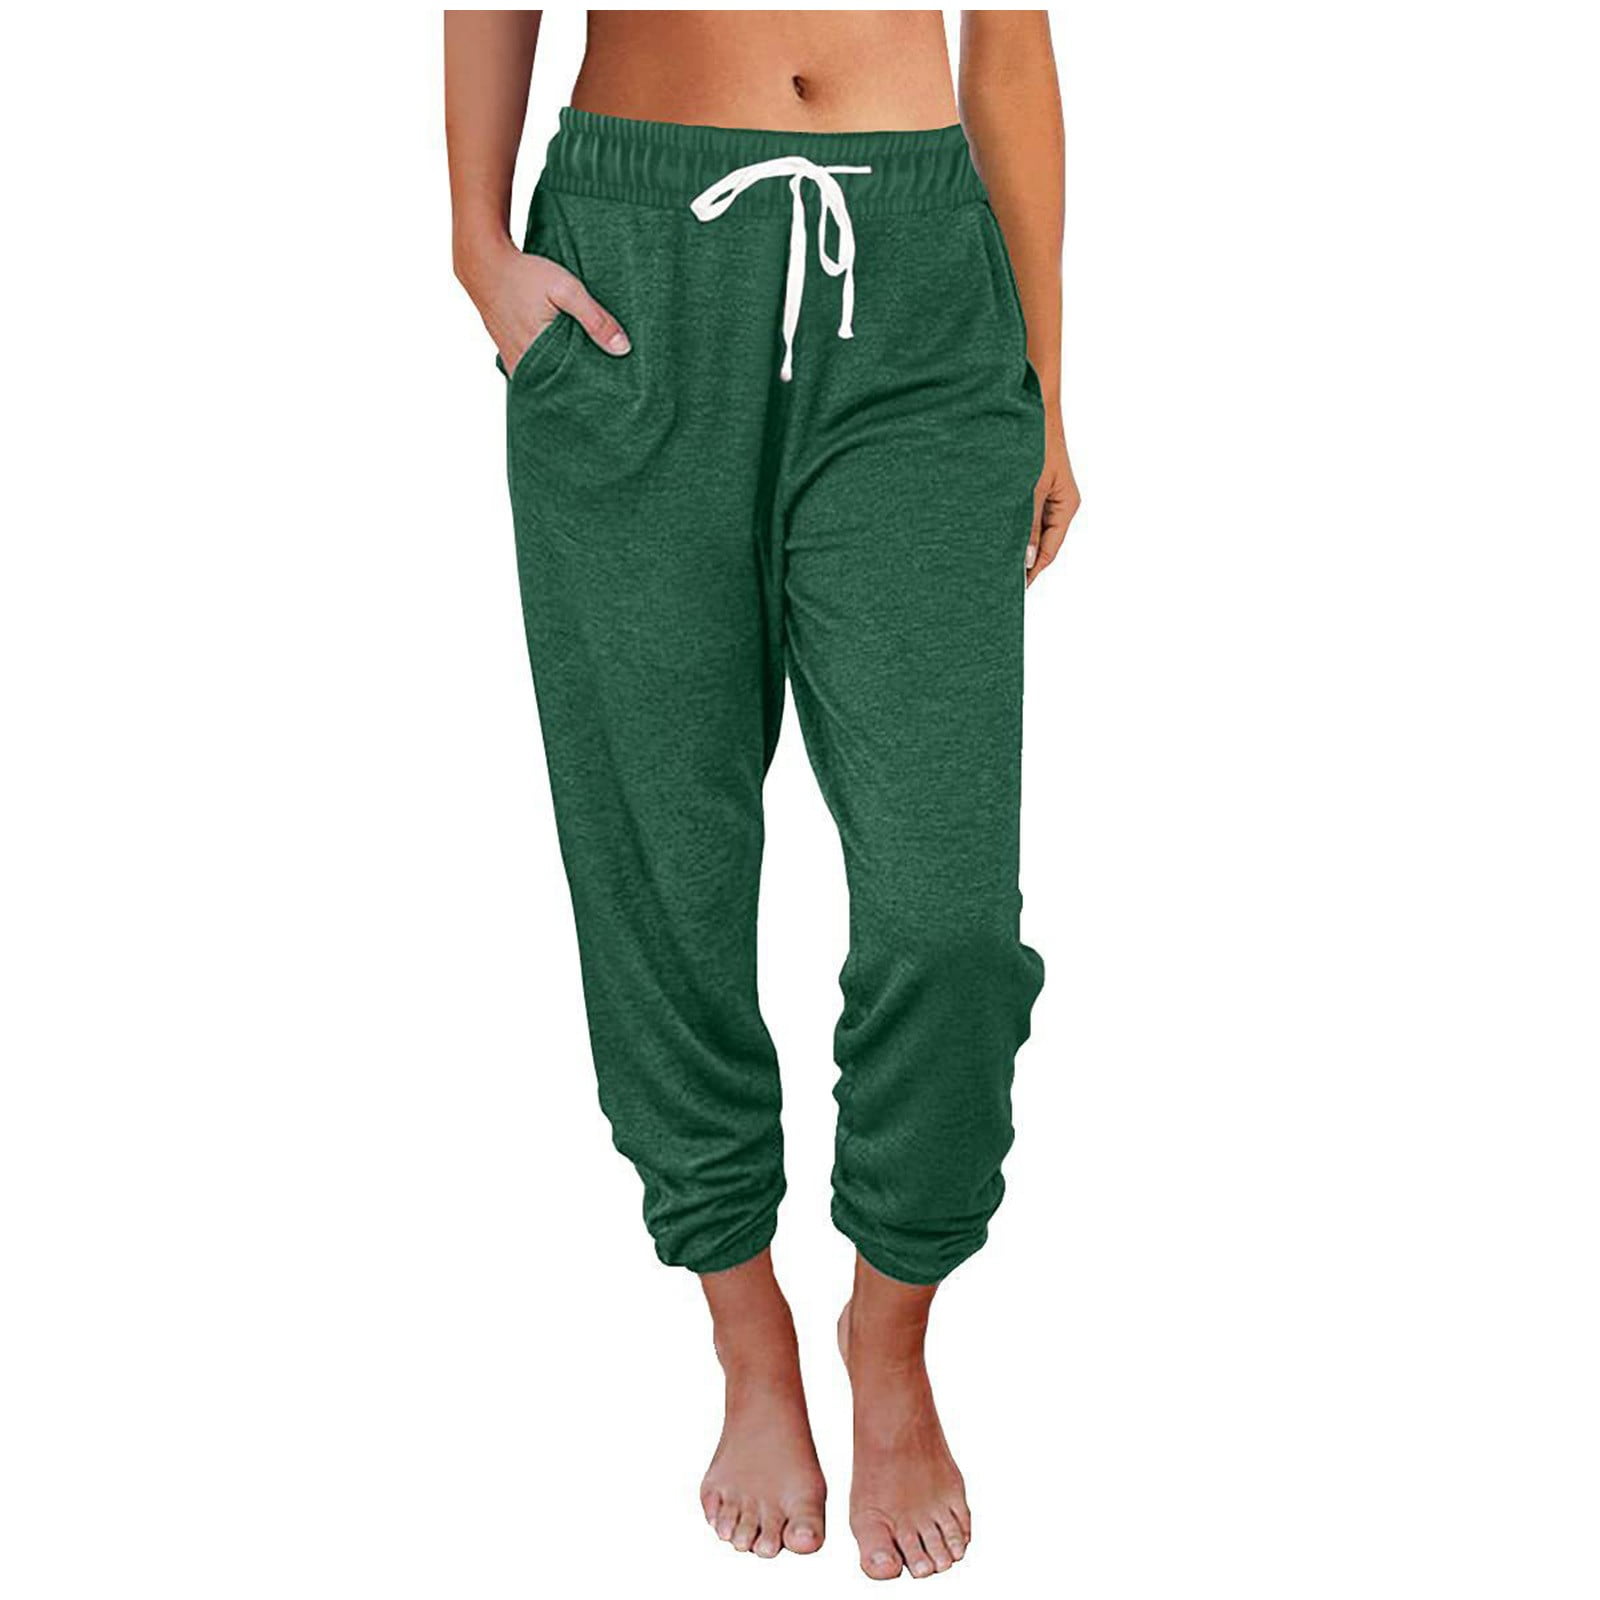 Women's Elastic High Waisted Sweatpants Solid Casual Loose Cinch Bottom  Jogger Pants Trousers with Pockets Drawstring 